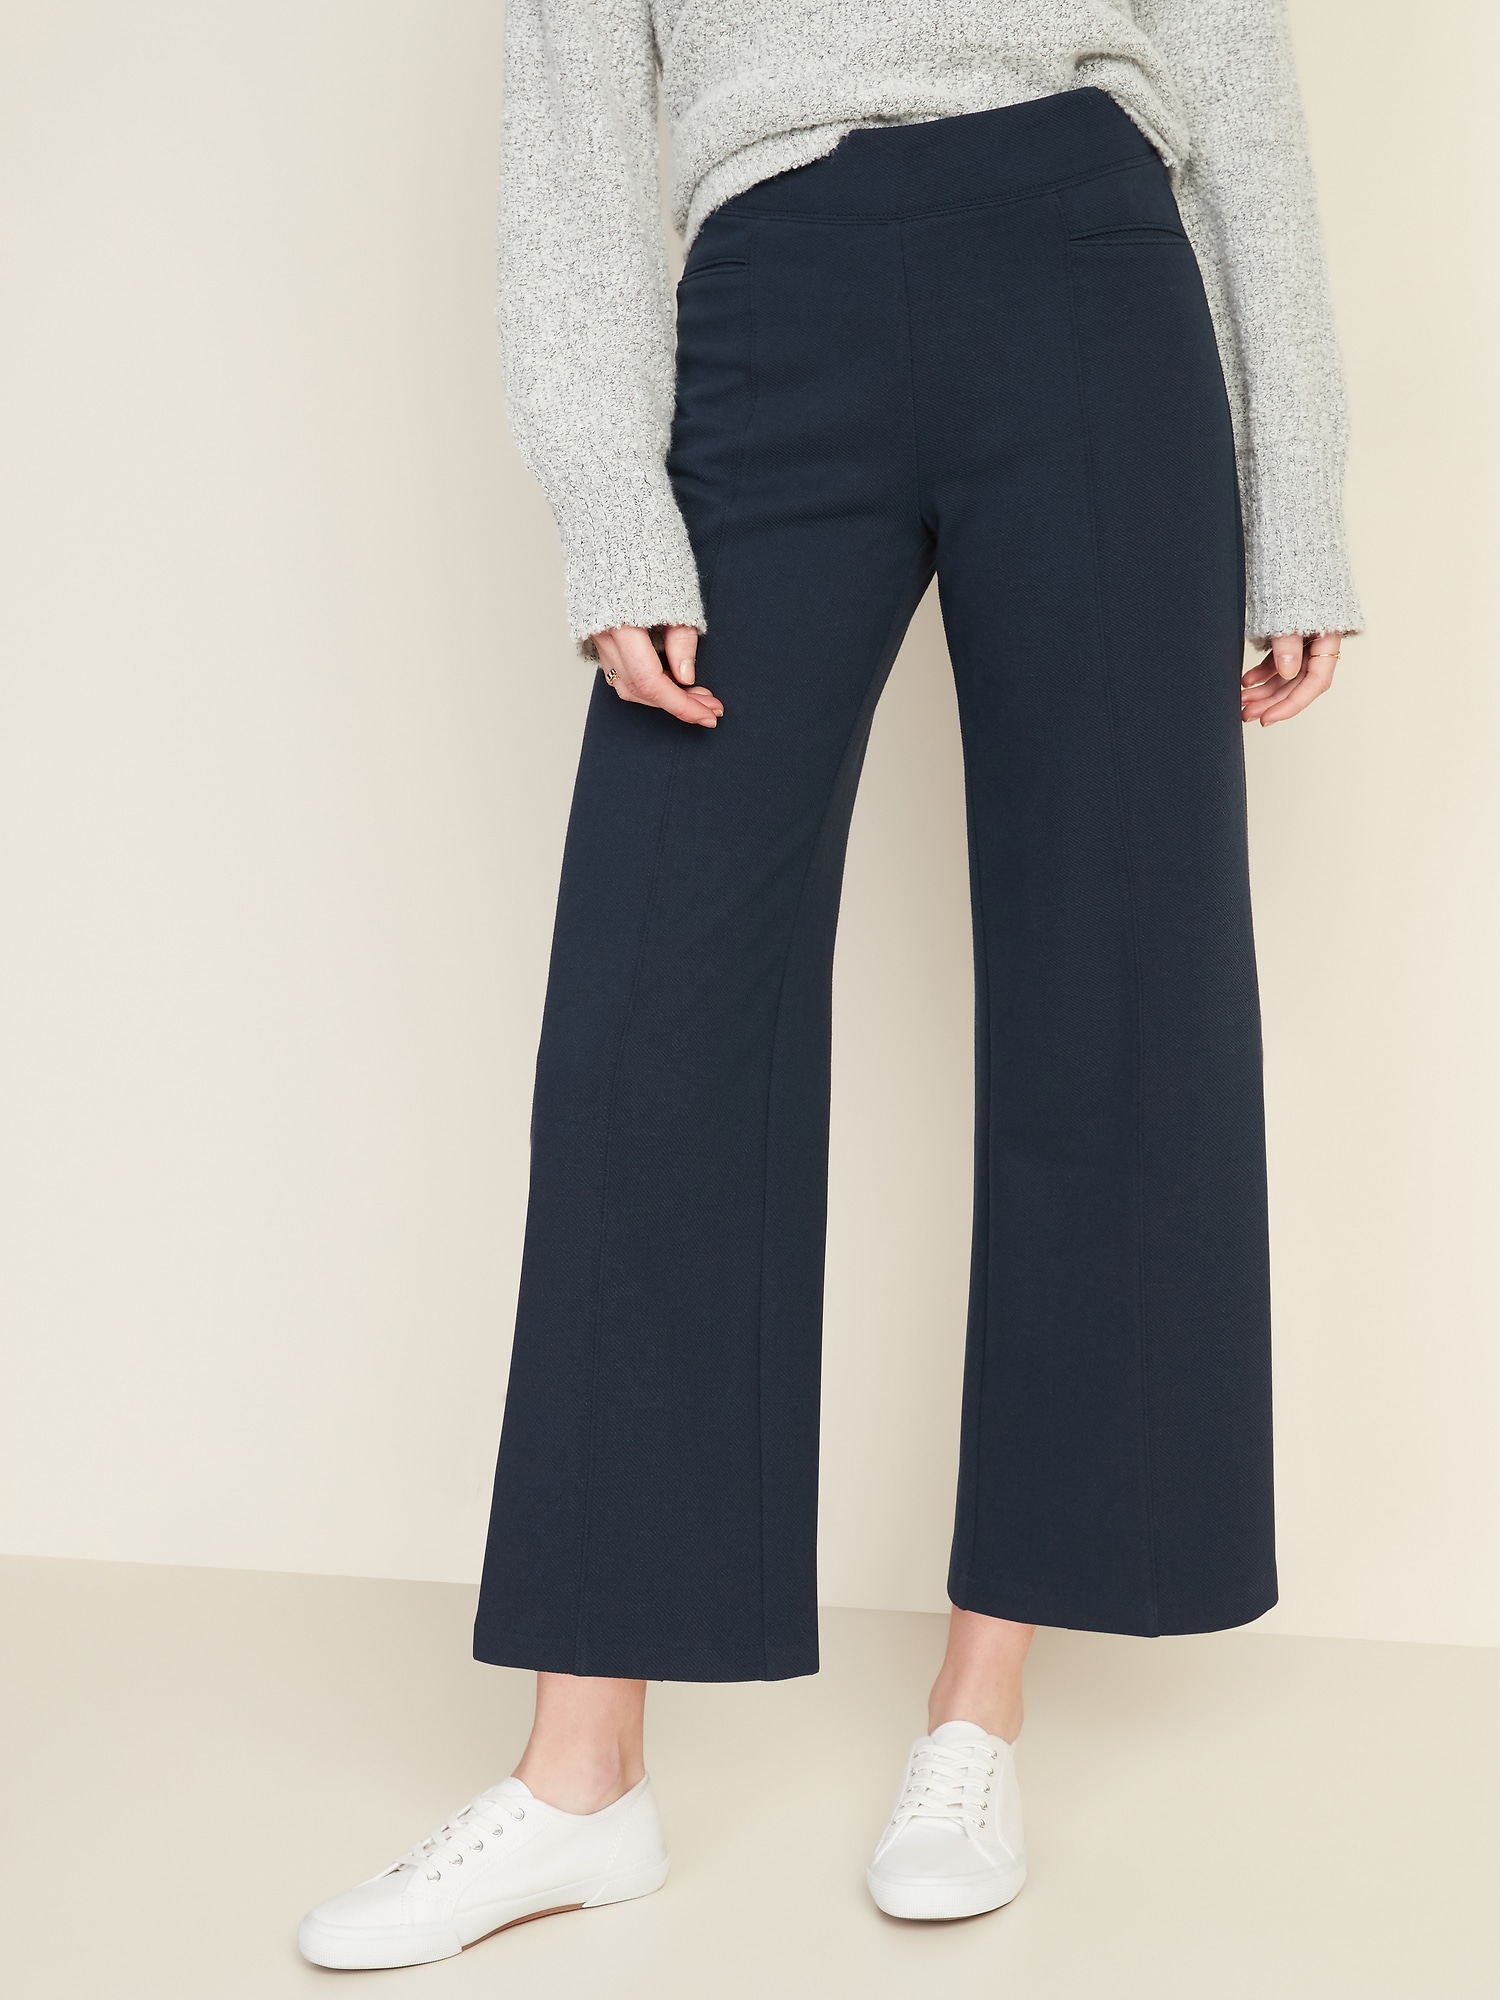 High-Waisted Wide-Leg Ponte-Knit Pants for Women